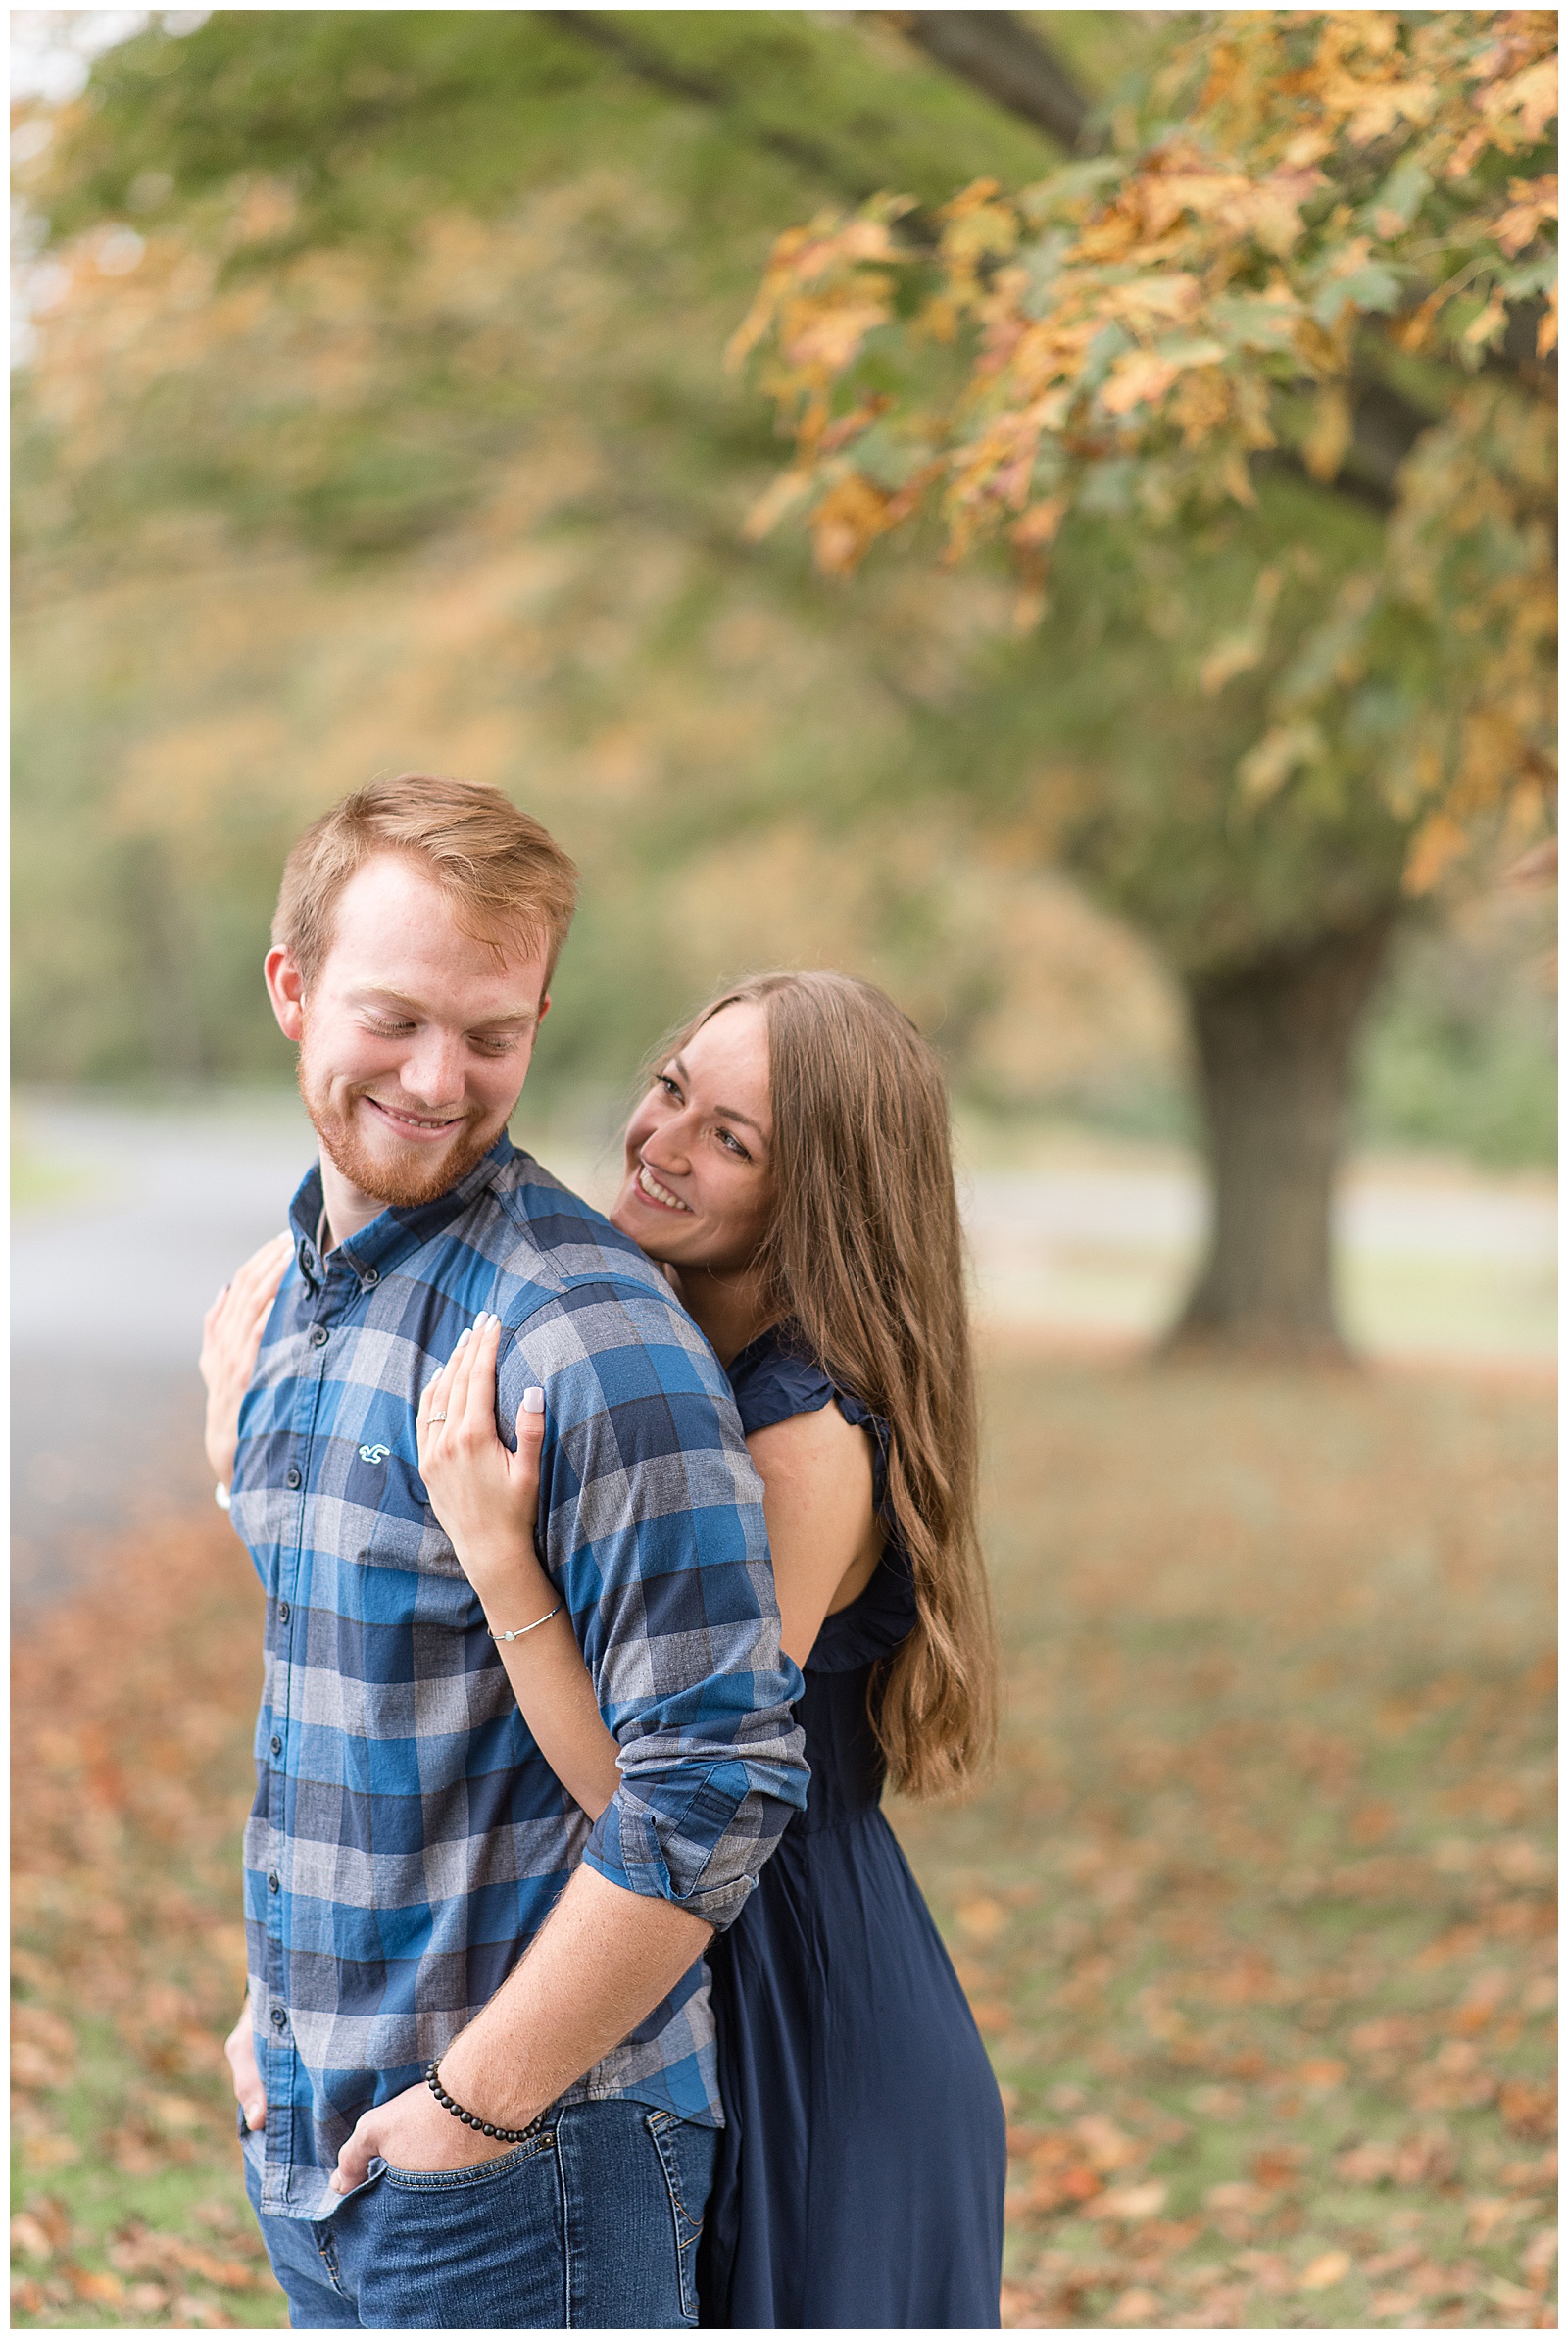 girl hugging guy from behind as he looks back and smiles surrounded by trees with their leaves beginning to change colors in lancaster pennsylvania